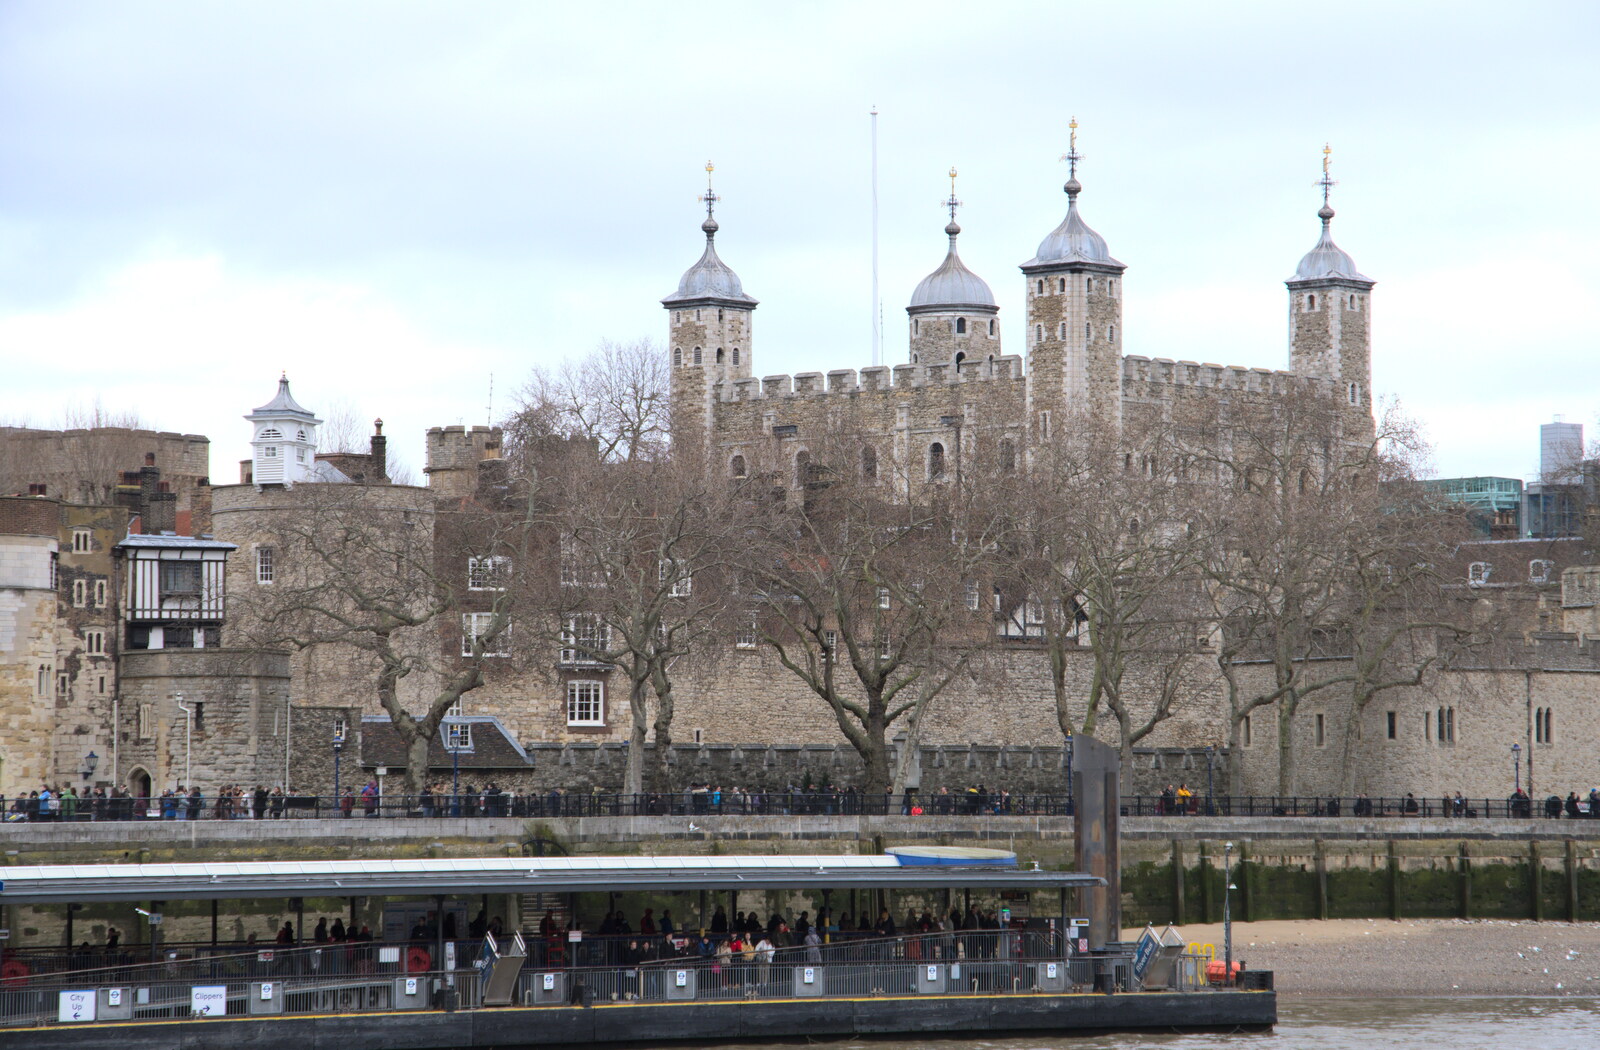 The Tower of London from HMS Belfast and the South Bank, Southwark, London - 17th February 2020